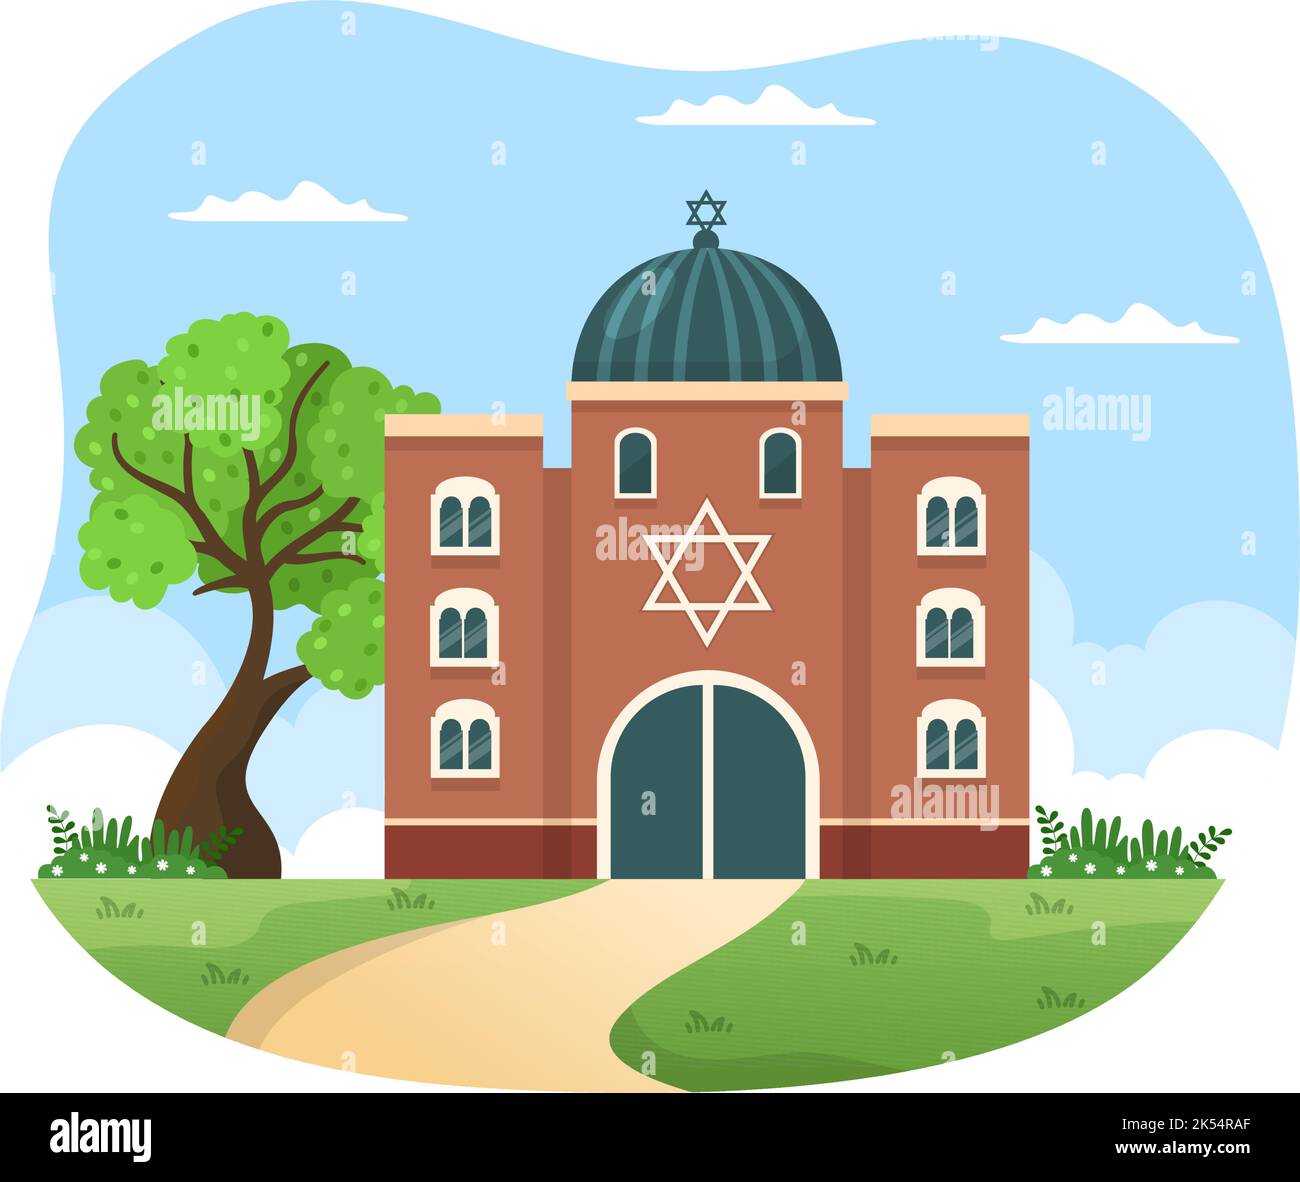 Synagogue Building or Jewish Temple with Religious, Hebrew or Judaism and Jew Worship Place in Template Hand Drawn Cartoon Flat Illustration Stock Vector